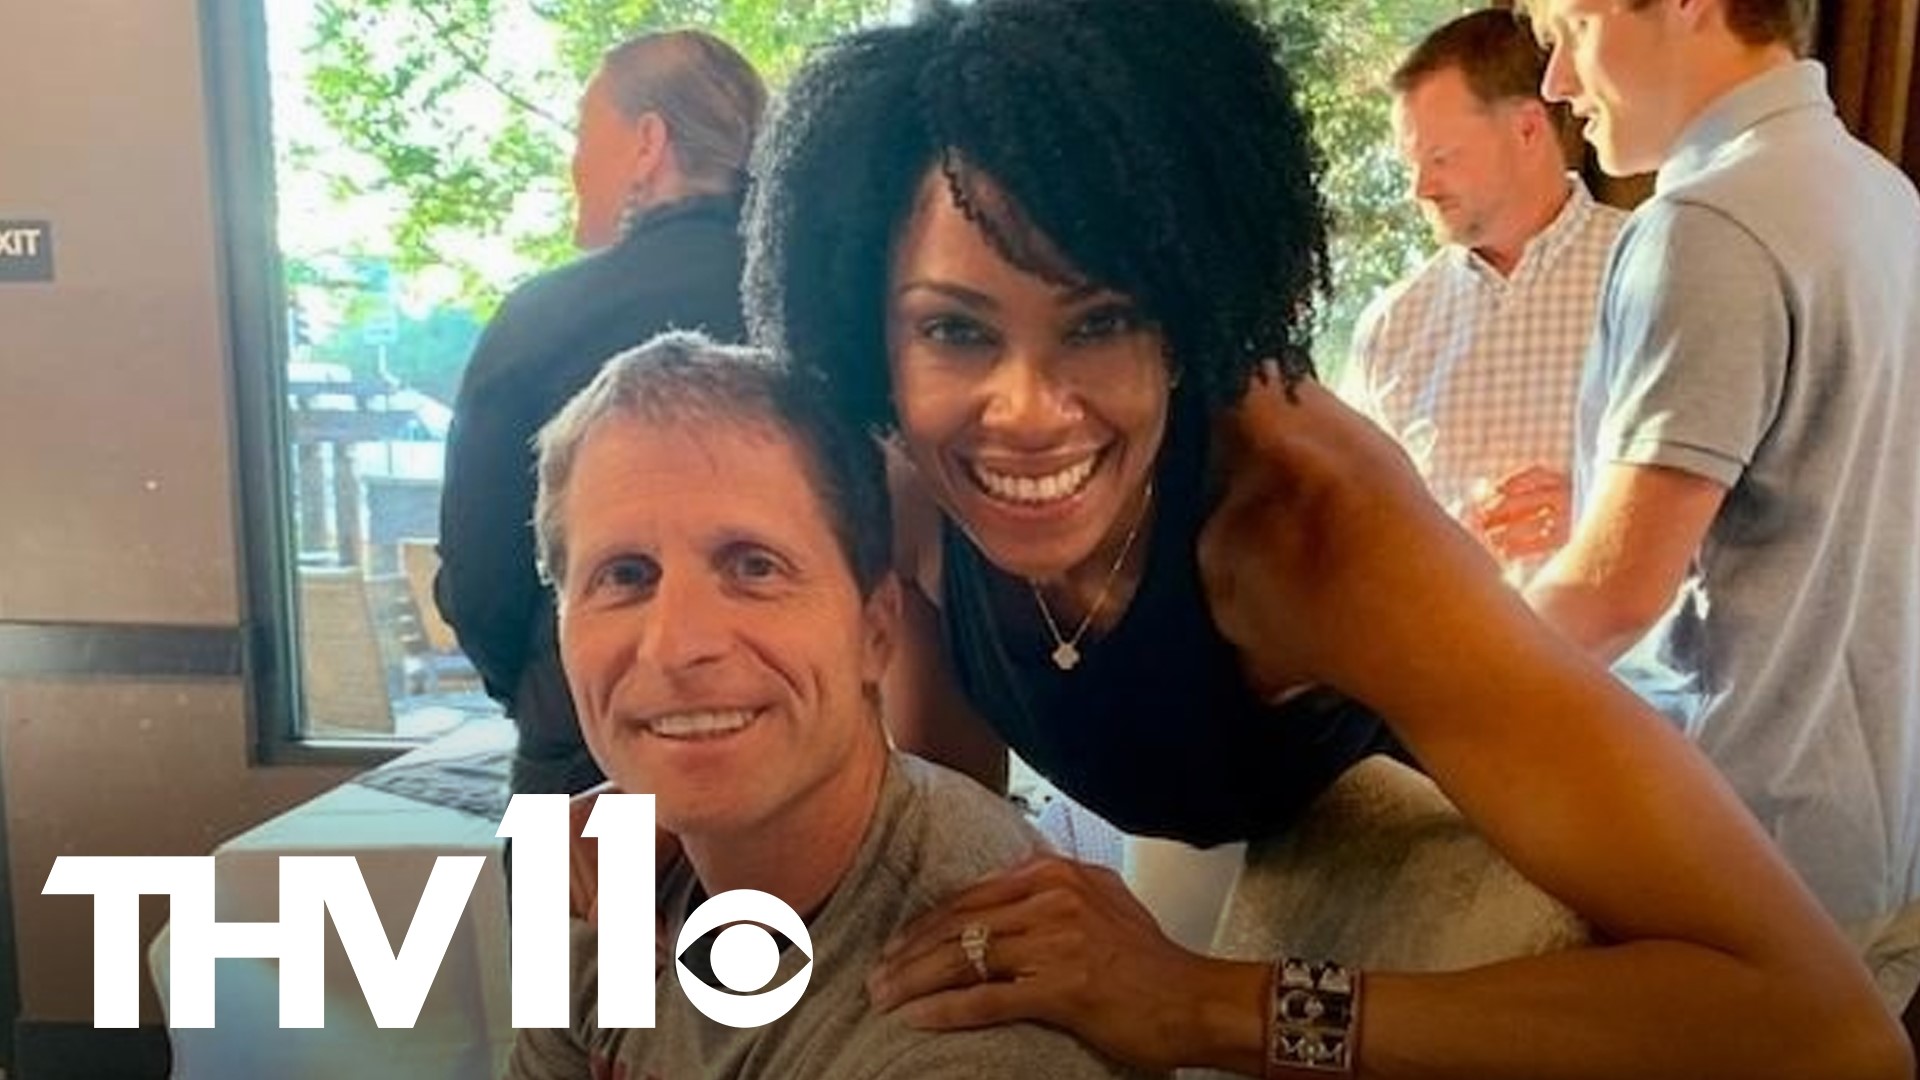 Eric Musselman's wife, Danyelle Musselman, has seen it all with Razorback hoops. She's excited about the Hogs' NCAA Tournament run this year.